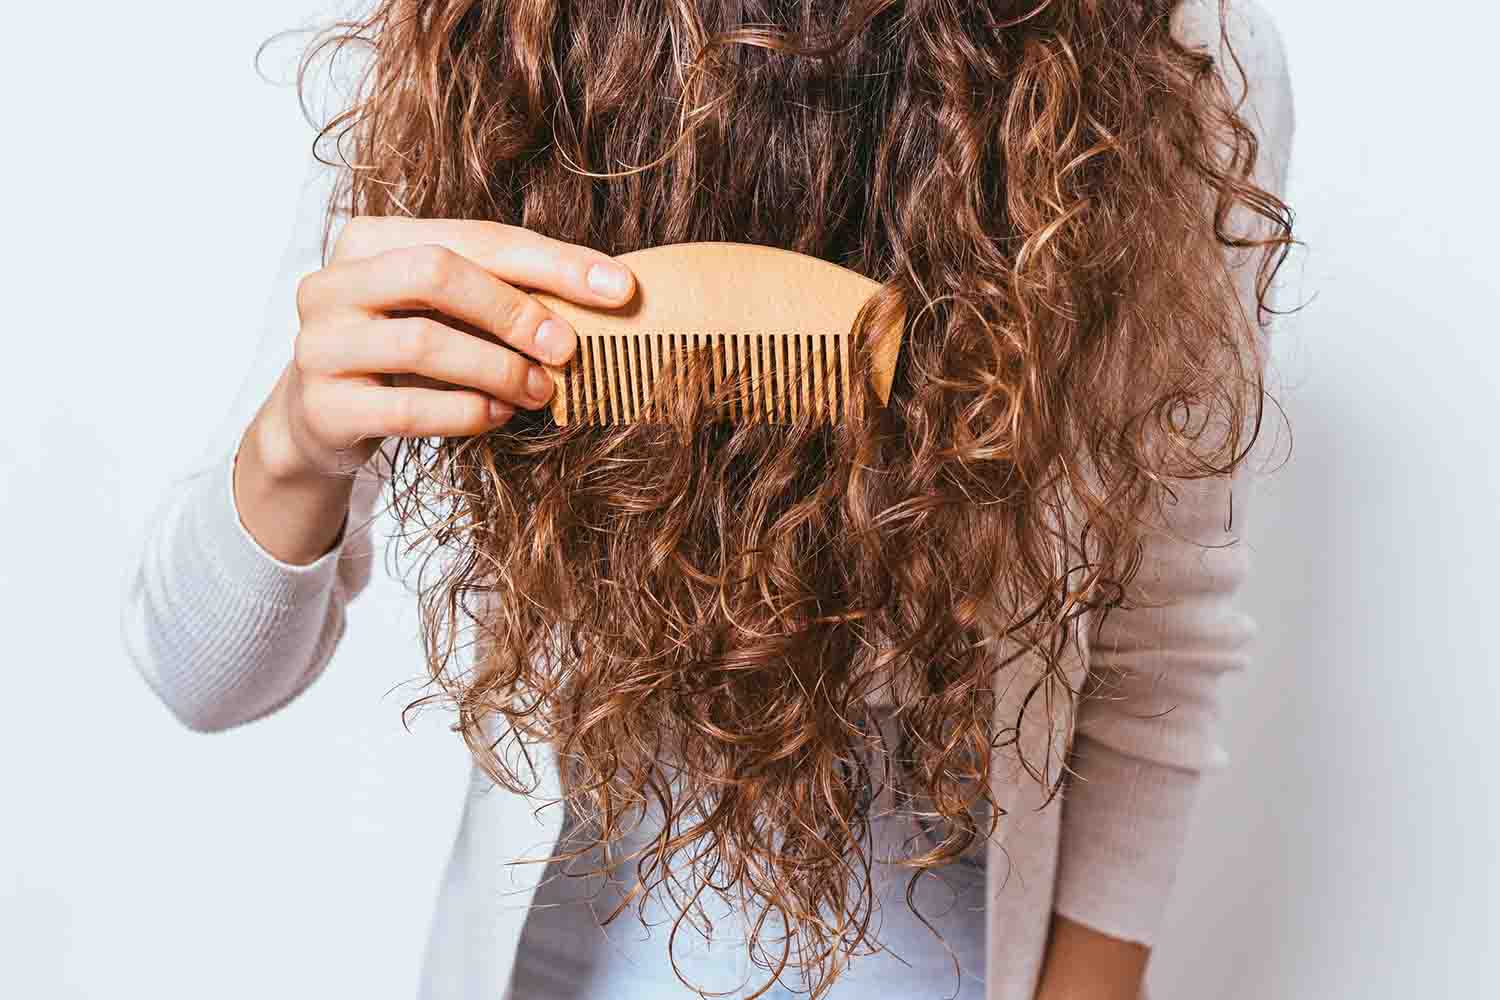 What’s the Best Hair Brush for Your Hair?